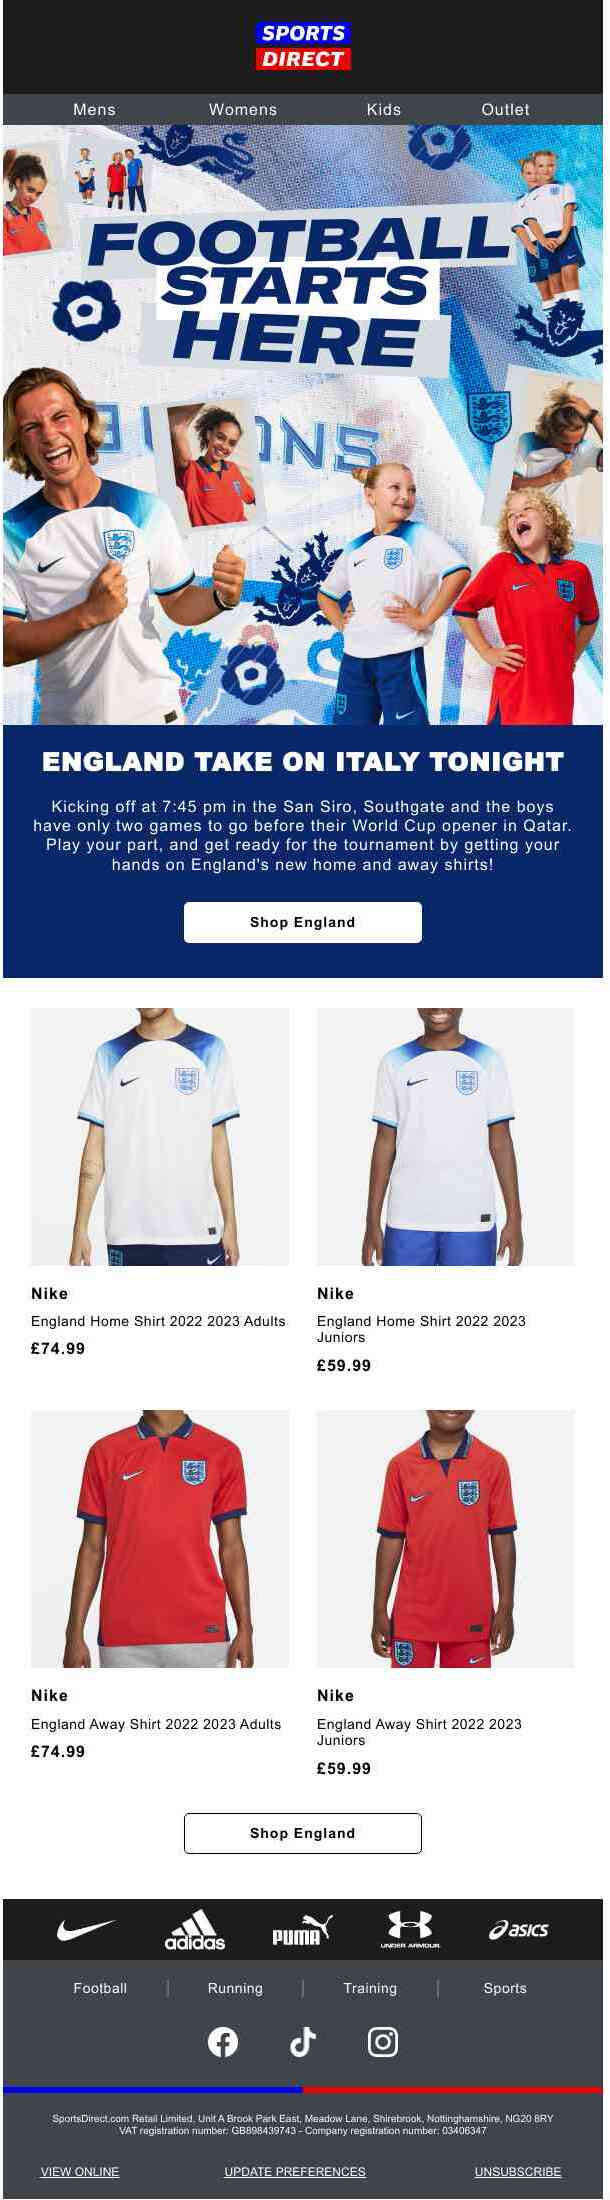 The Three Lions debut their new kit tonight in Italy
 ⚽